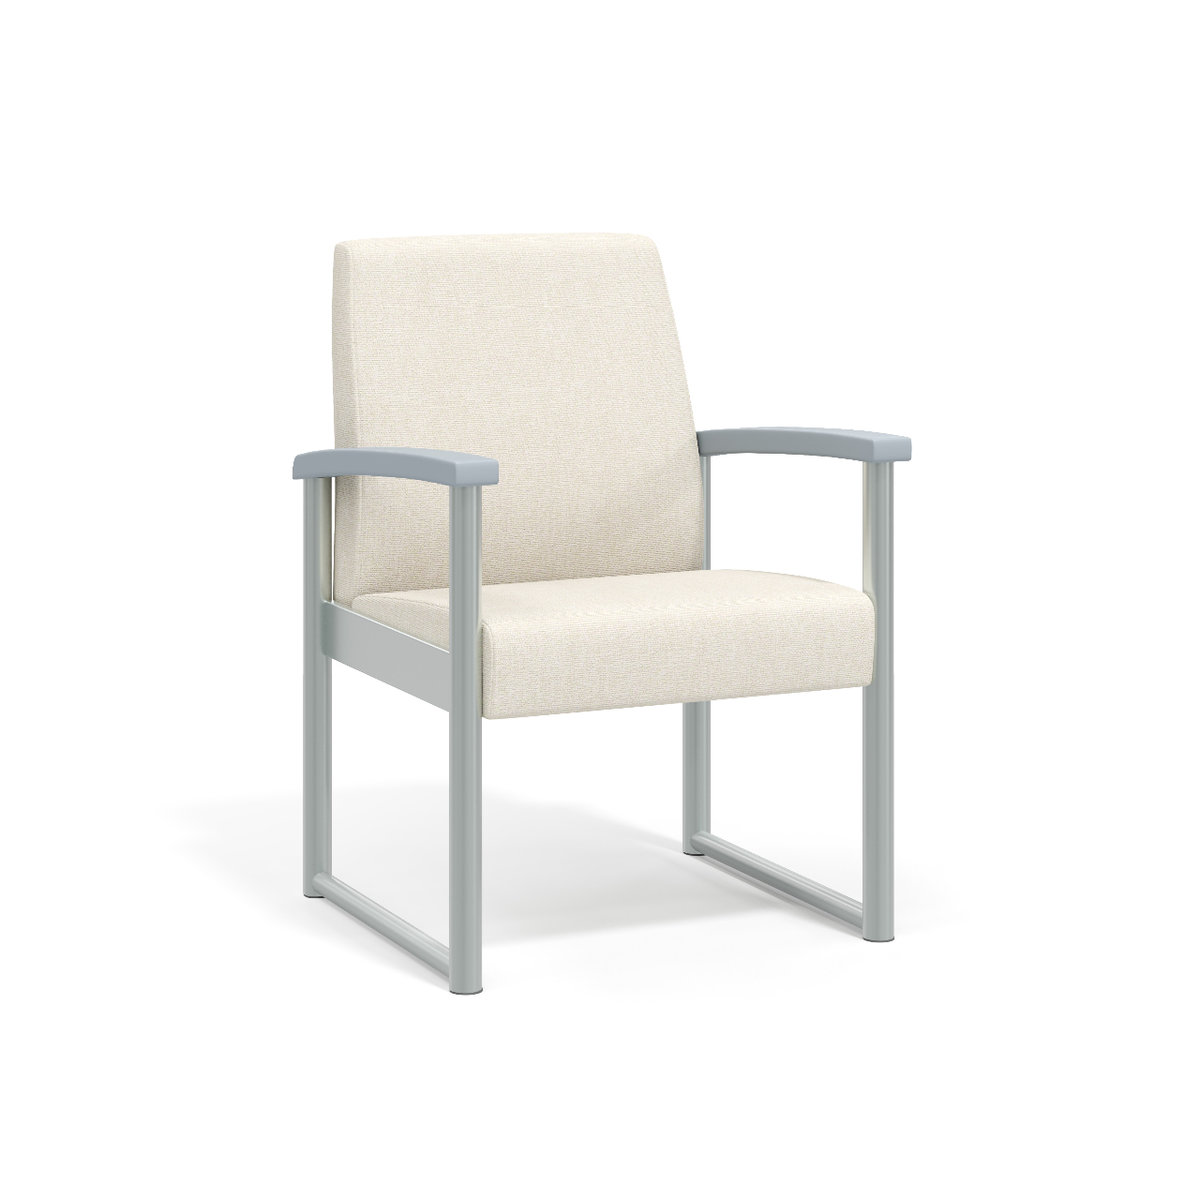 Single Chair, open arms Photo